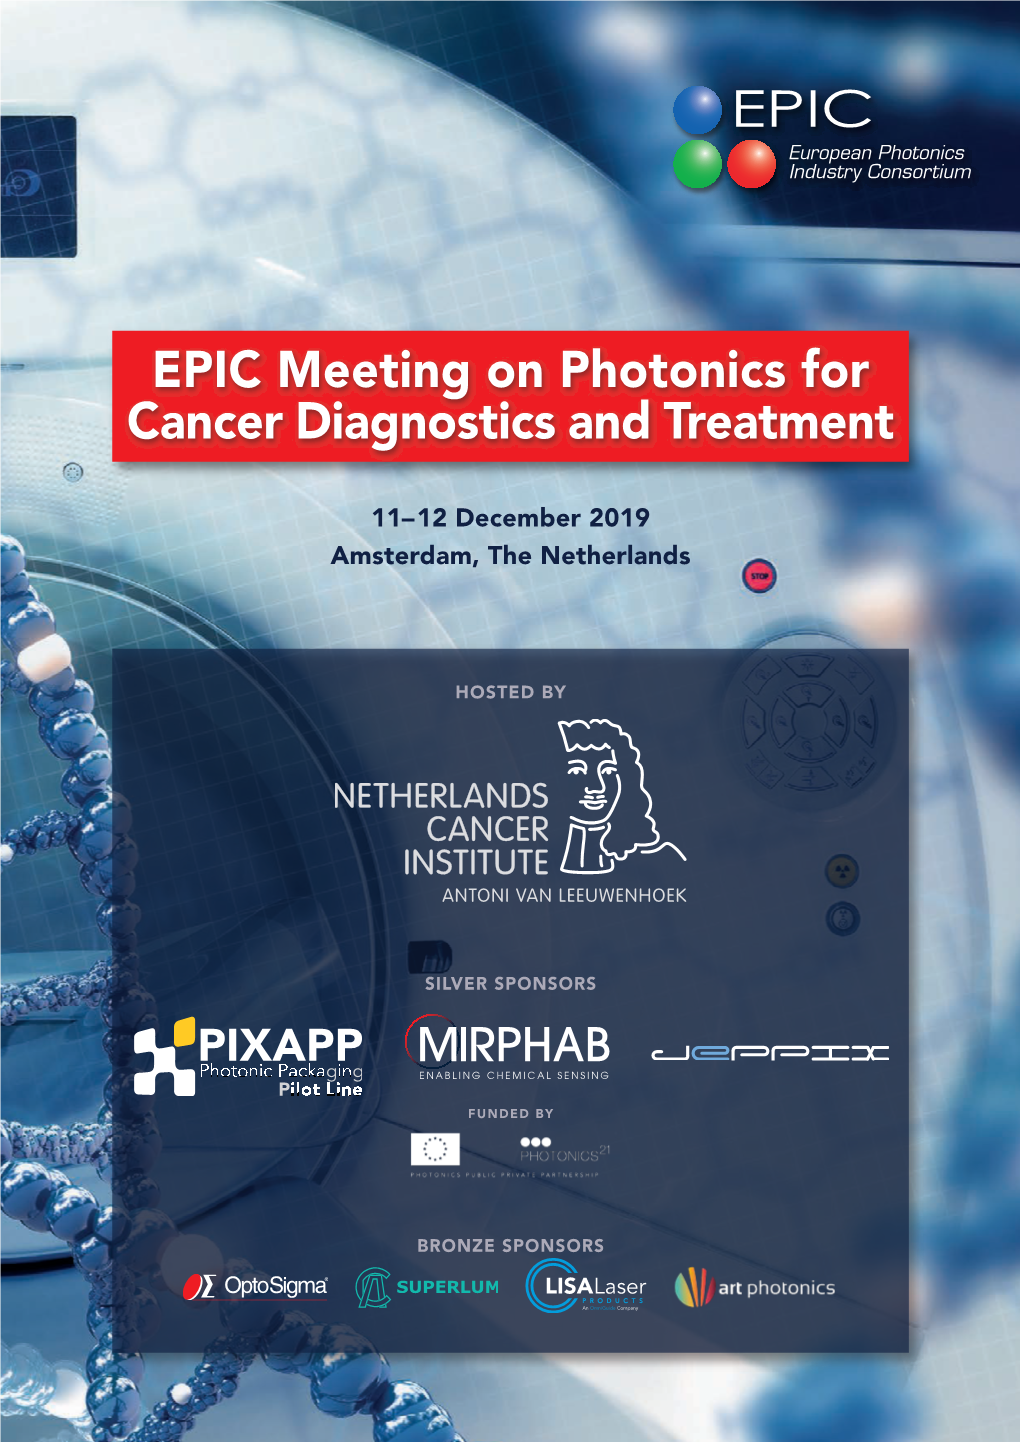 EPIC Meeting on Photonics for Cancer Diagnostics and Treatment